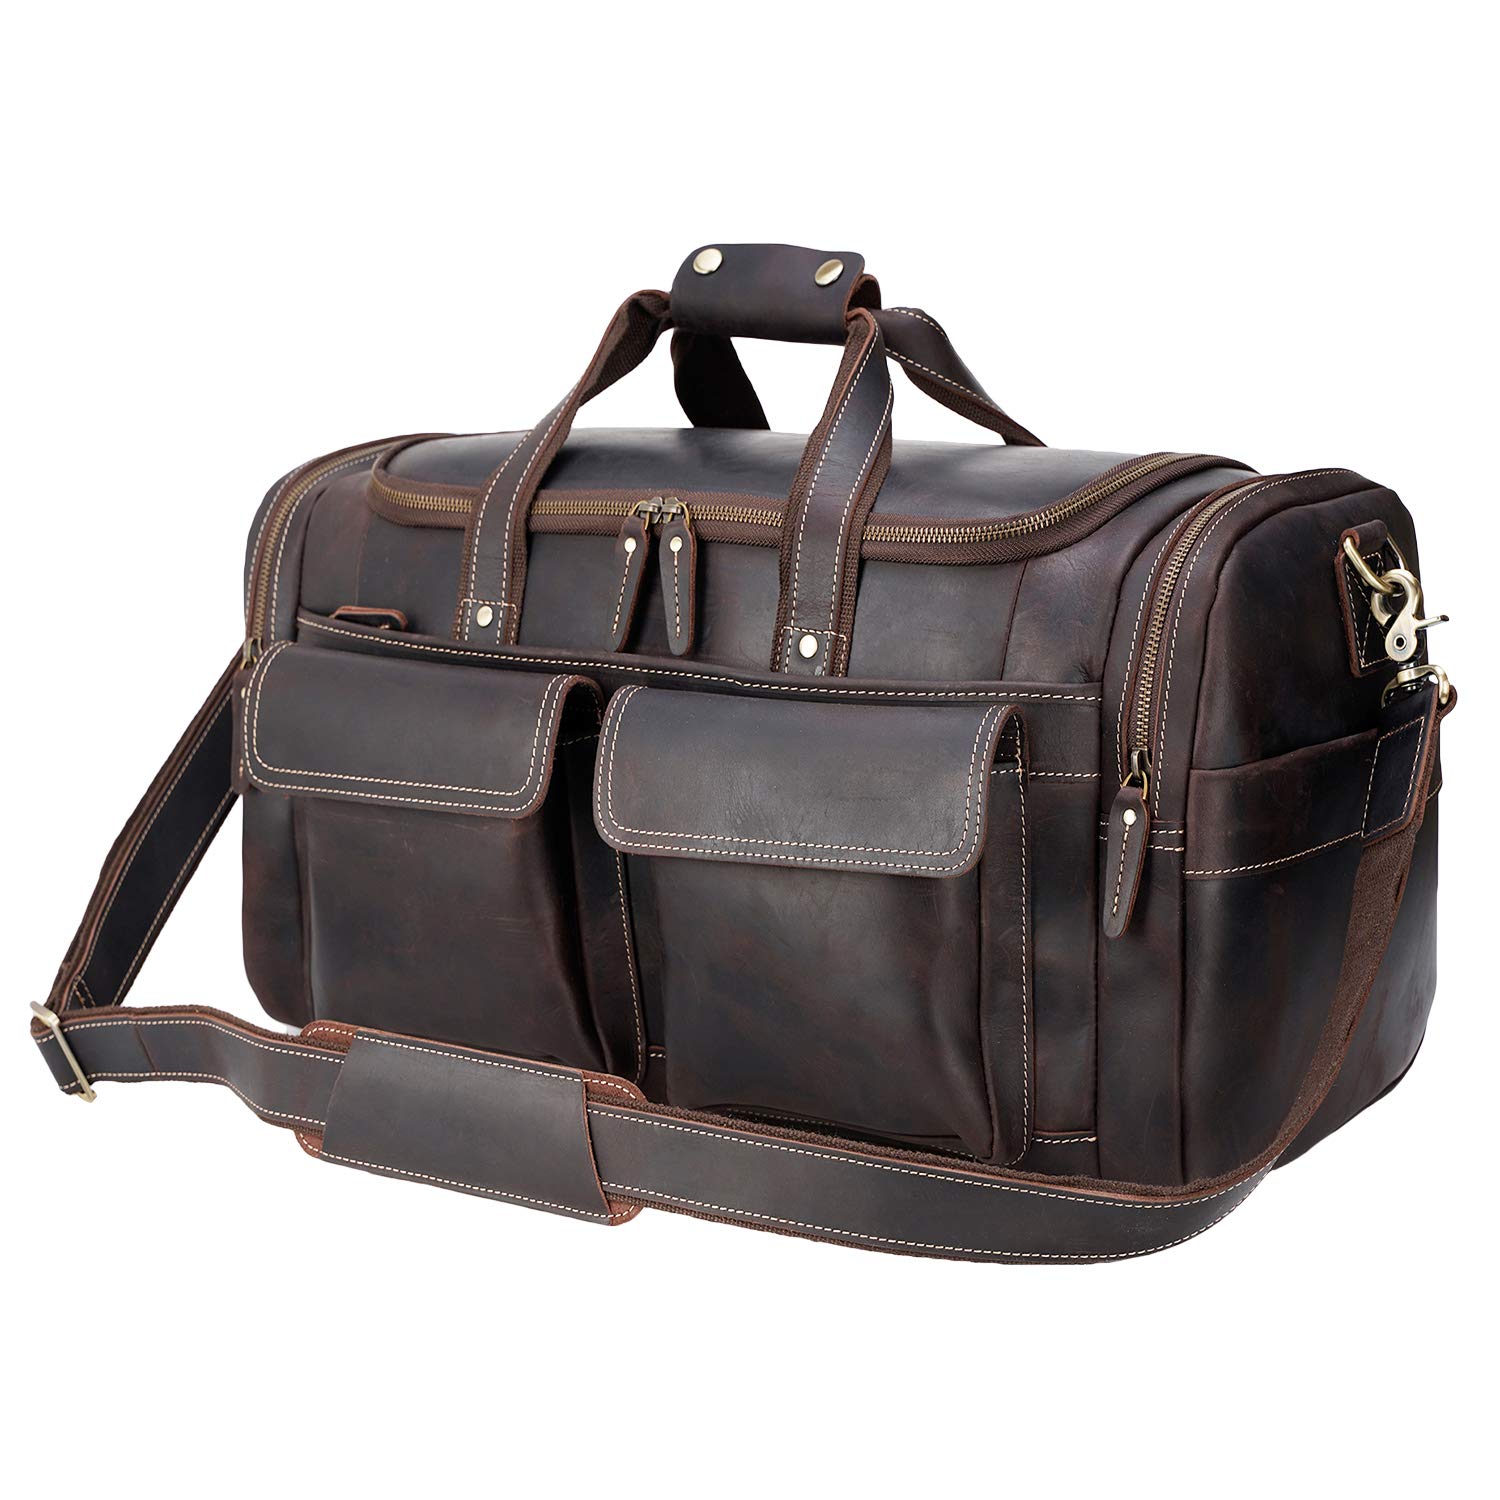 Polare Leather Duffle Weekend Travel Bag For Men With Full Grain Cowhi